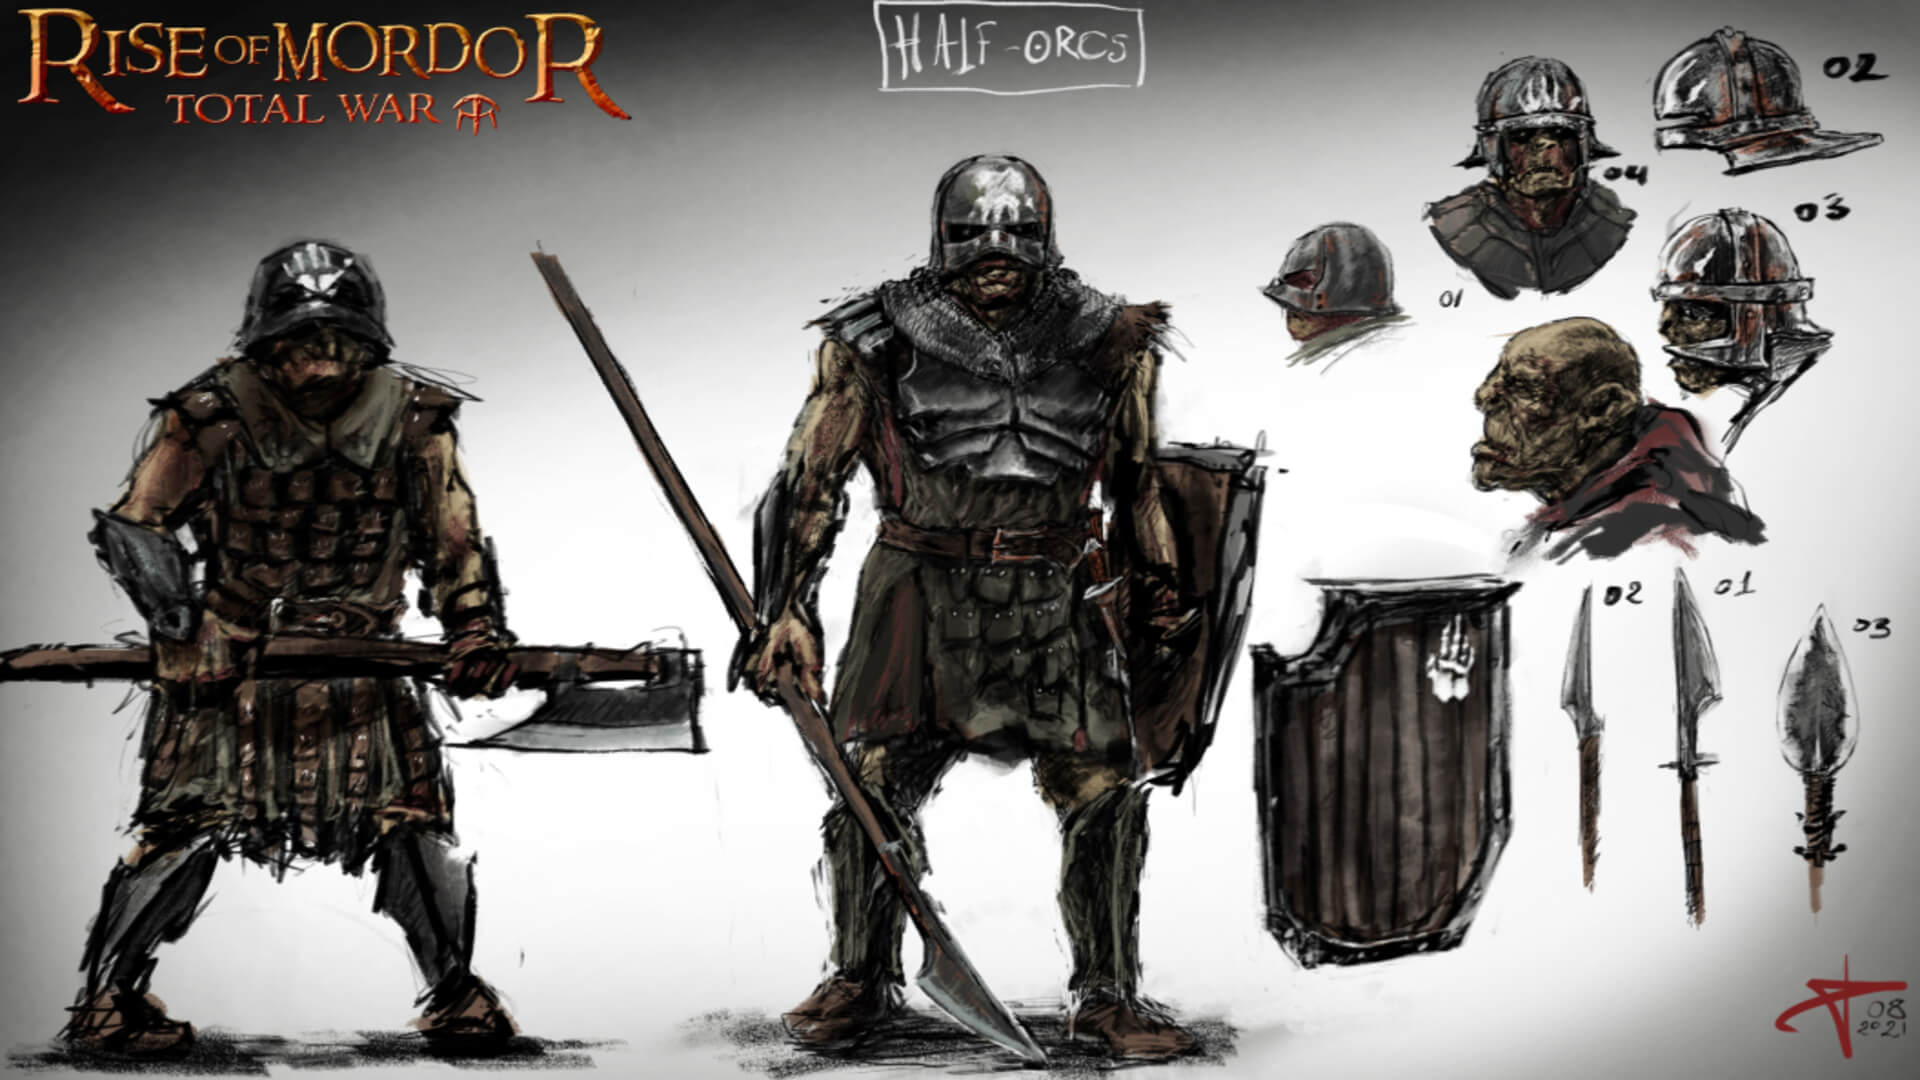 Concept art for the Isengard Half Orc from the Rise of Mordor mod.